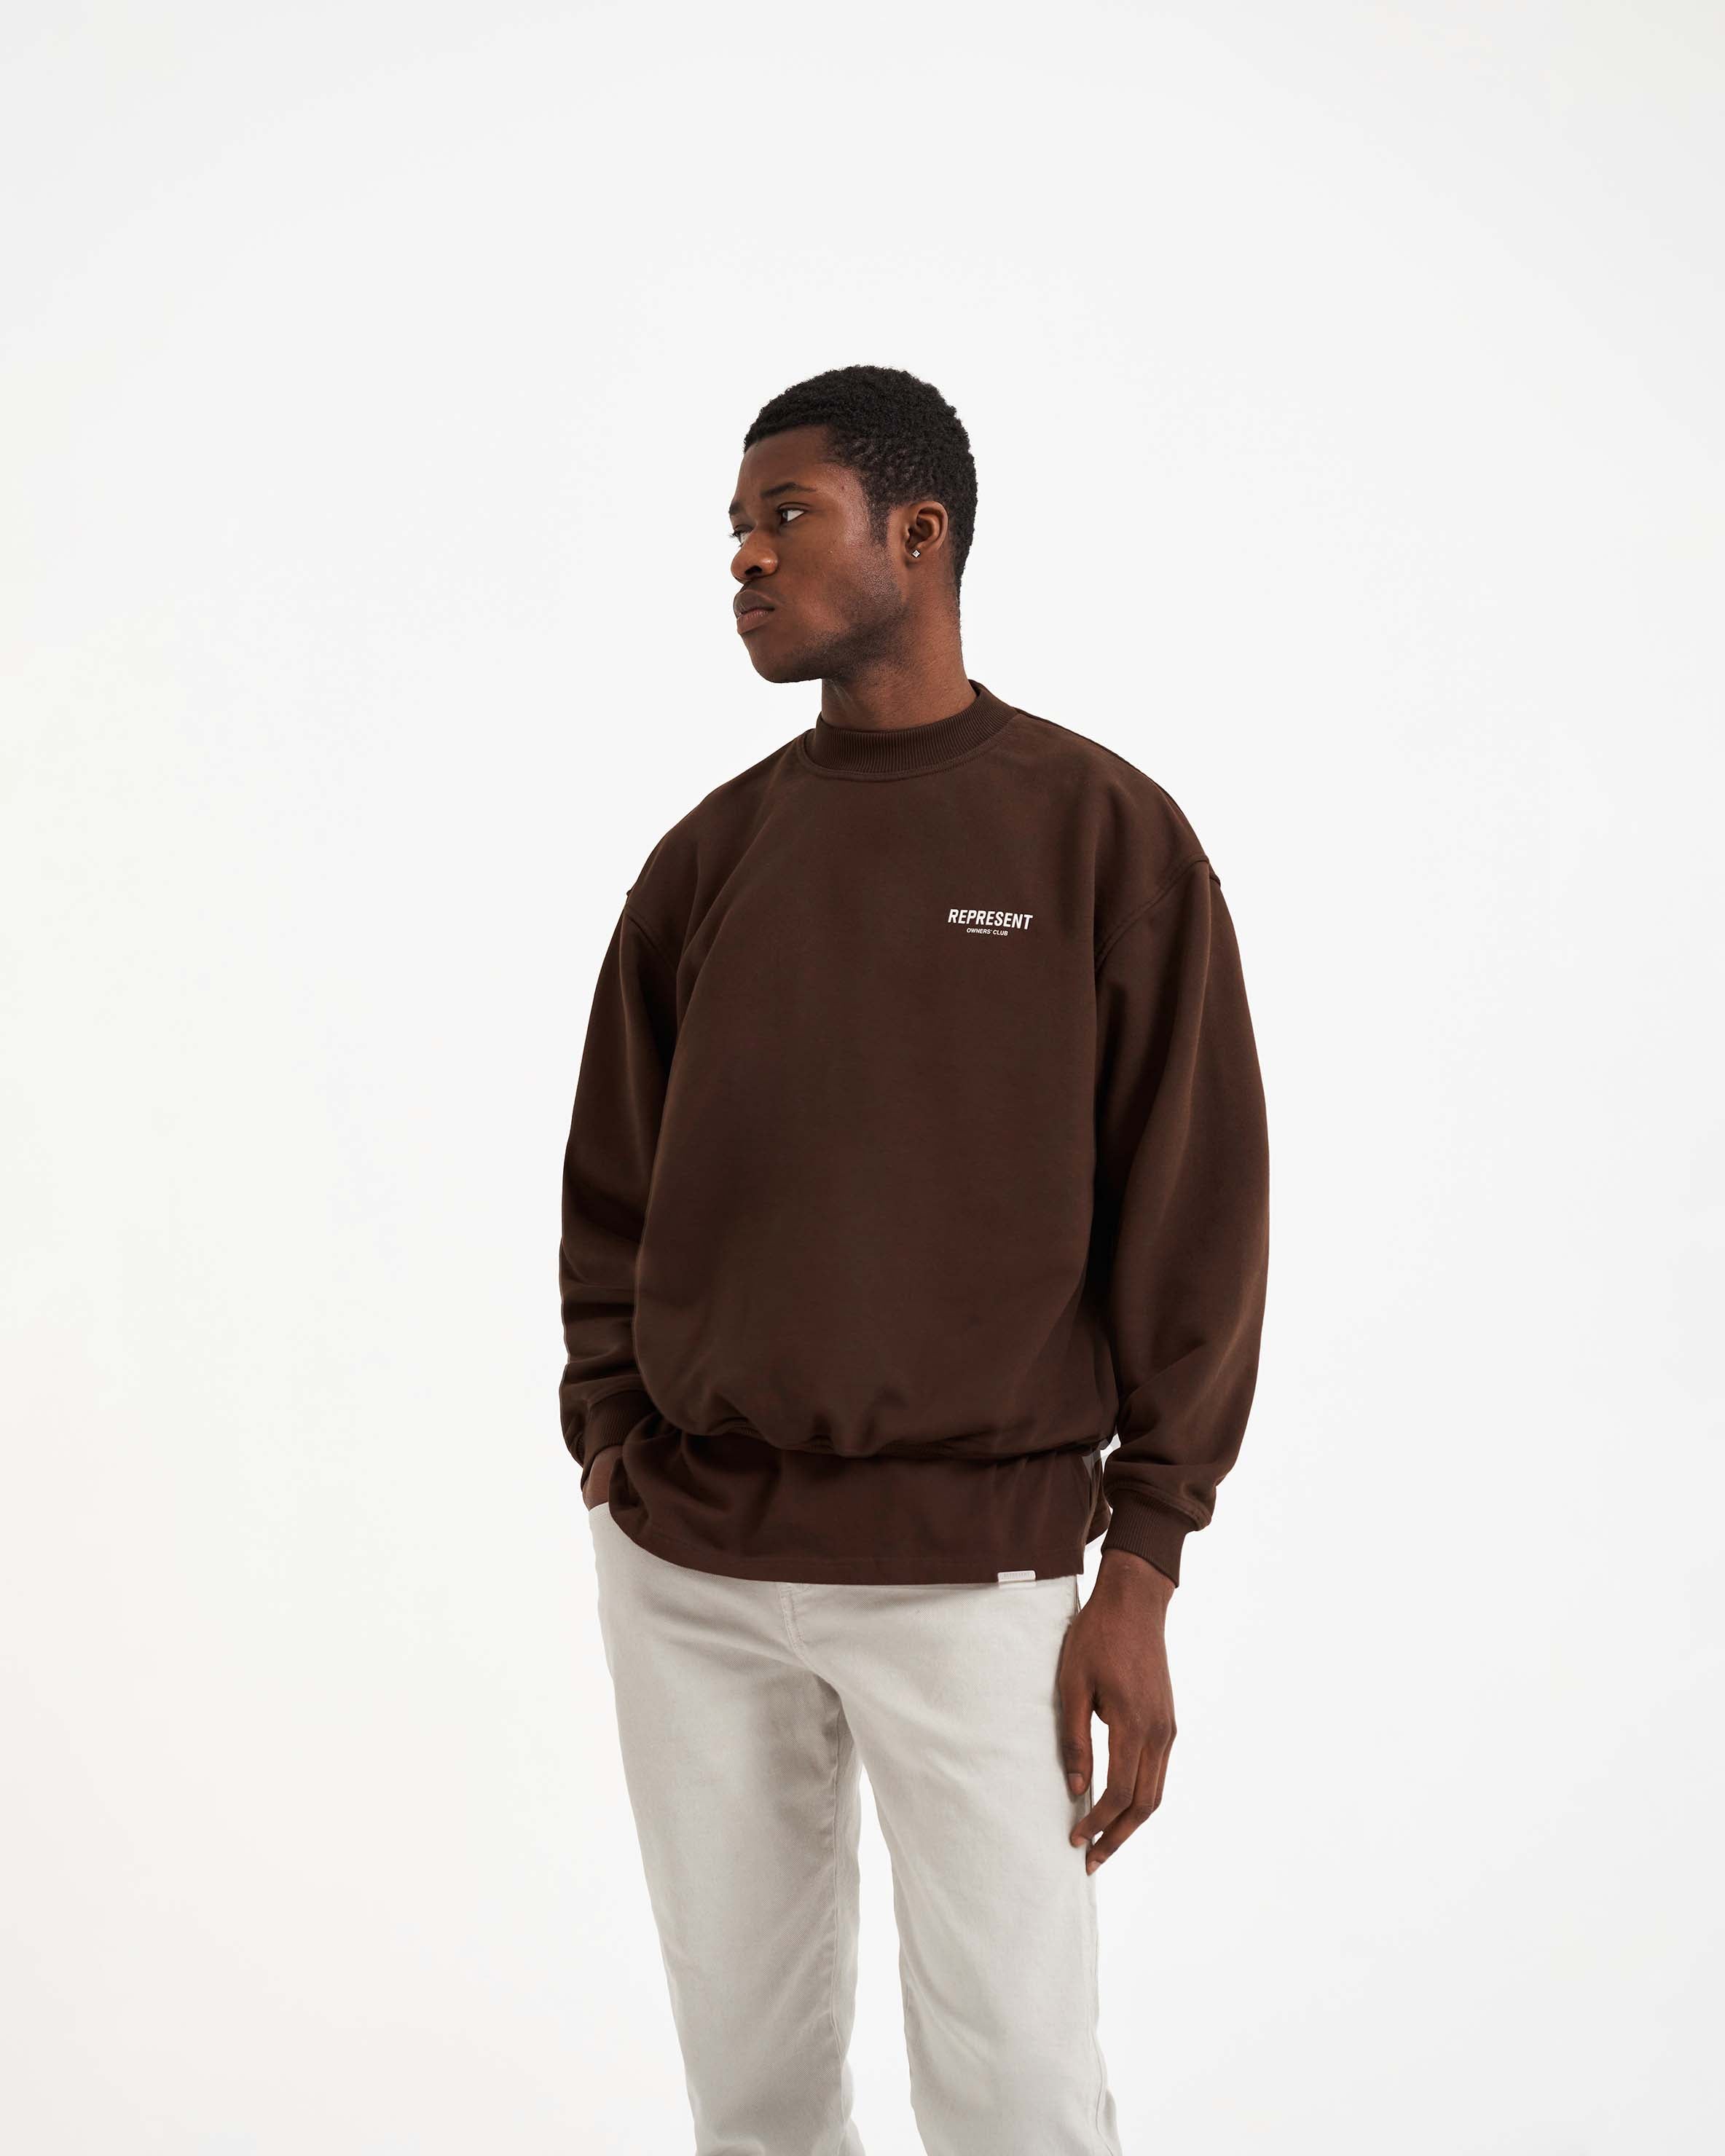 Brown Sweater | Owners Club | REPRESENT CLO